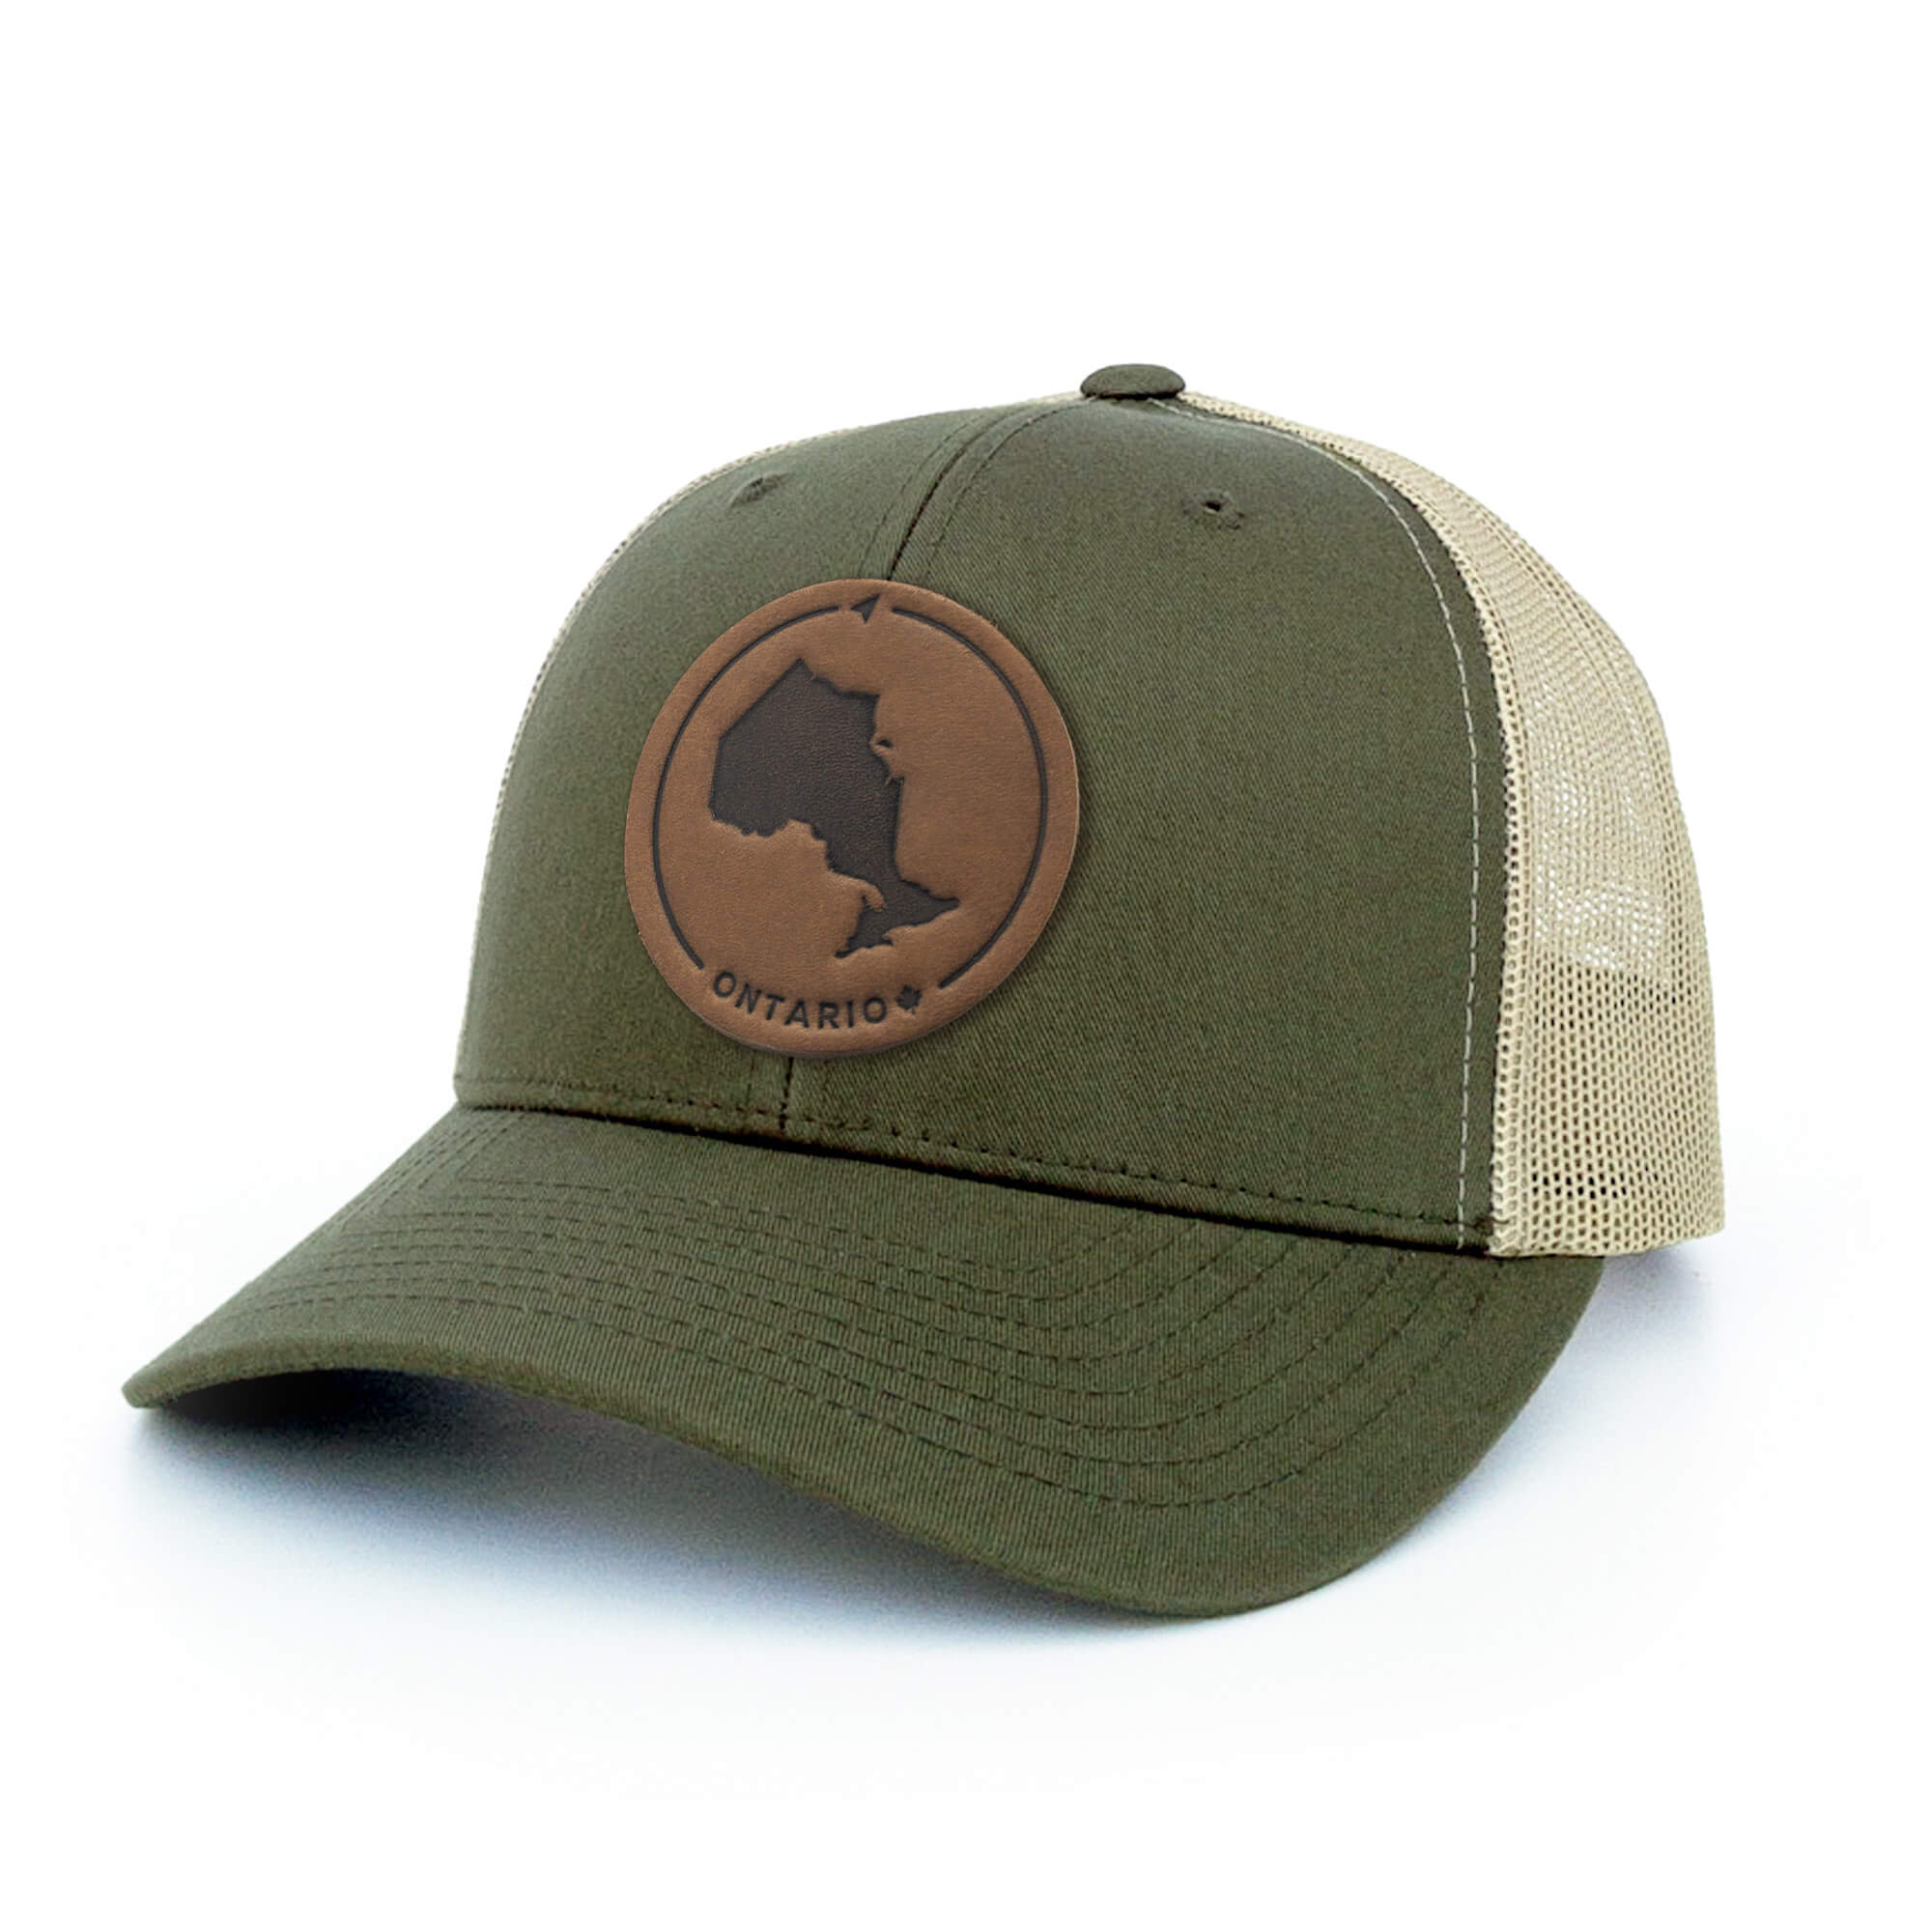 Moss Green and khaki trucker hat with full-grain leather patch of Ontario | BLACK-002-003, CHARC-002-003, NAVY-002-003, HGREY-002-003, MOSS-002-003, BROWN-002-003